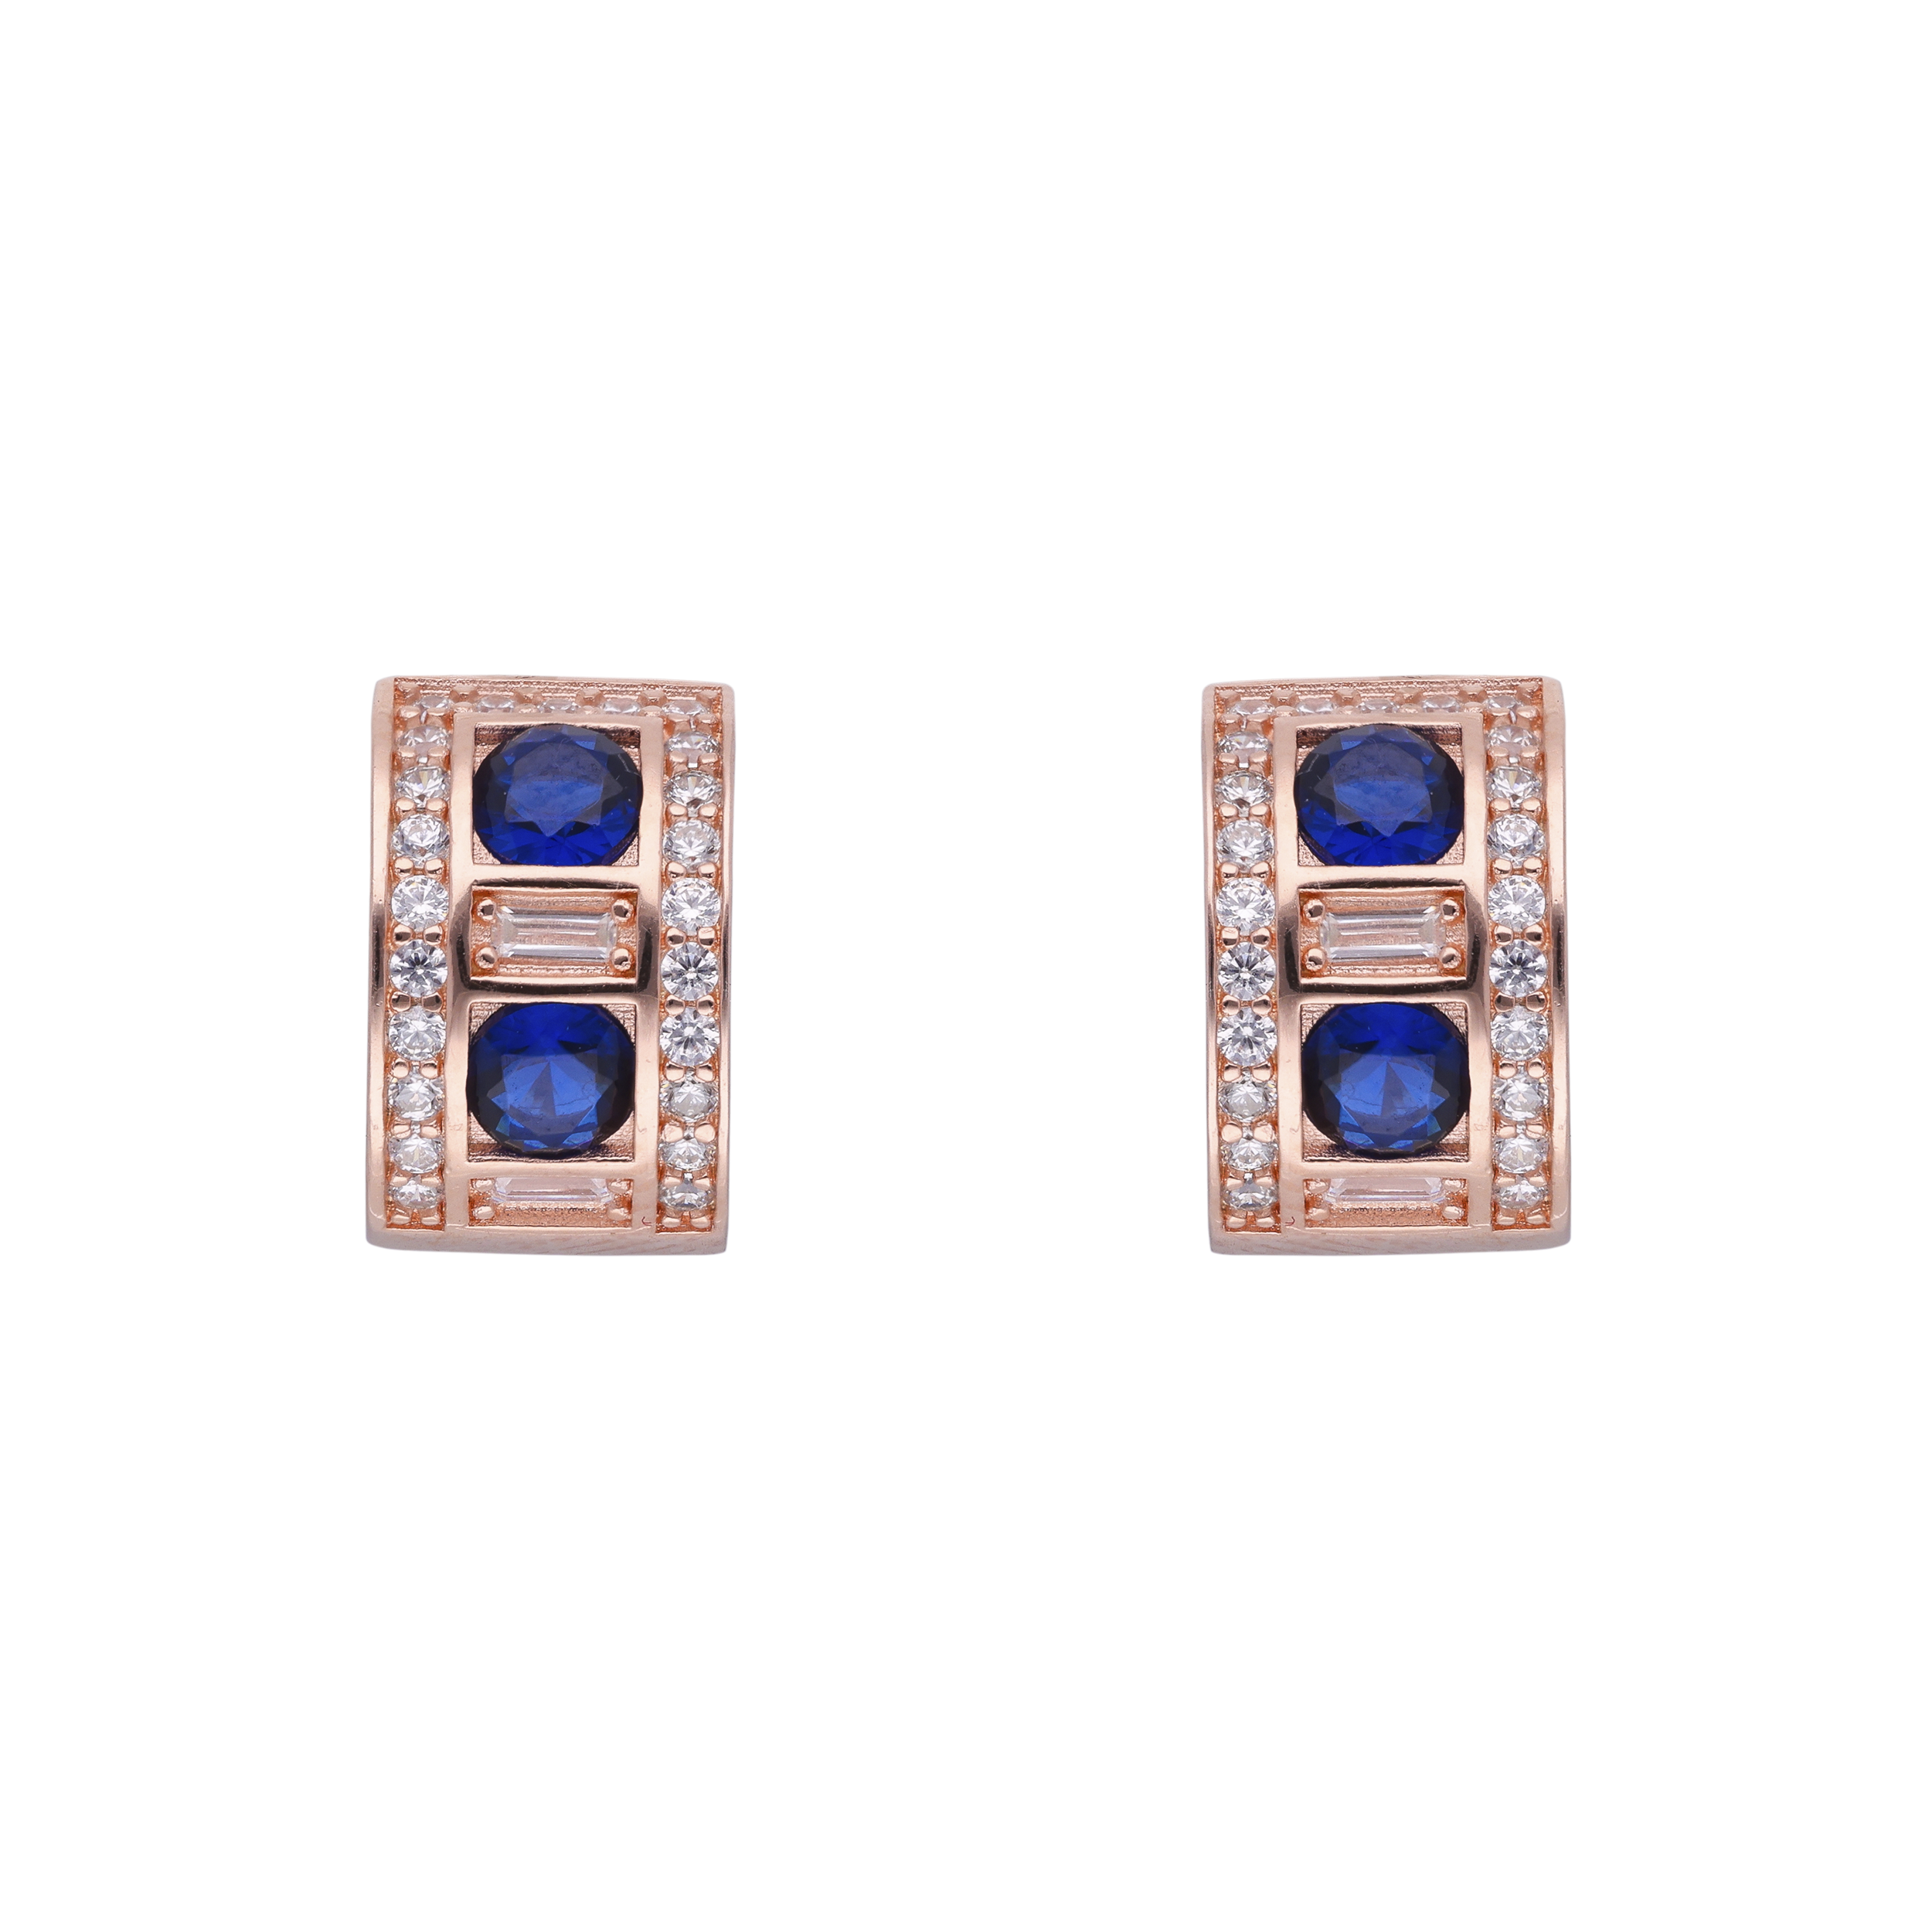 Colorful Gemstone and Cubic Zirconia Rose Gold Ear Hoops | SKU : 0019889269, 0019889276